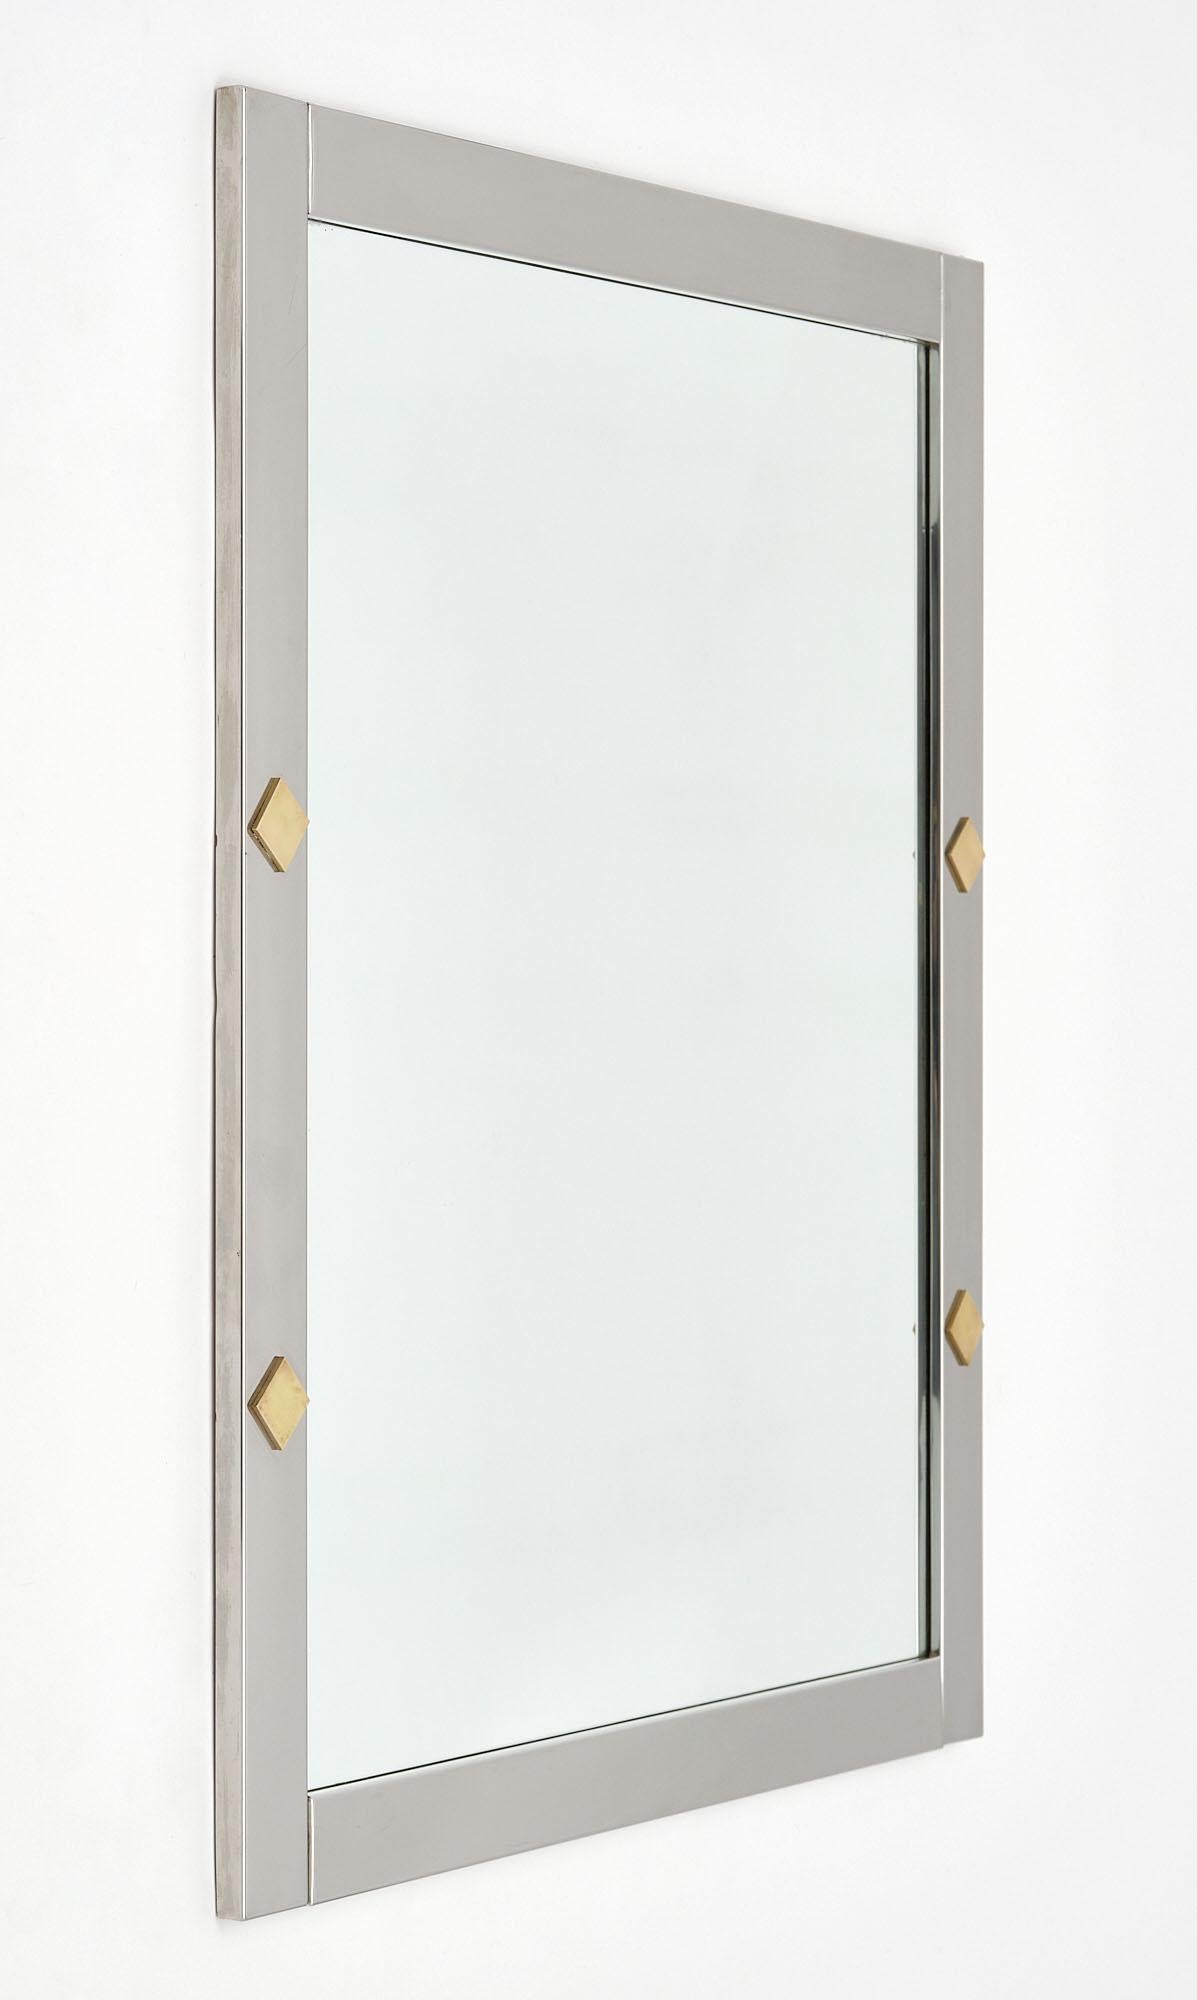 Pair of mirrors in the Italian modernist style. This pair is made of chromed steel with brass accents.